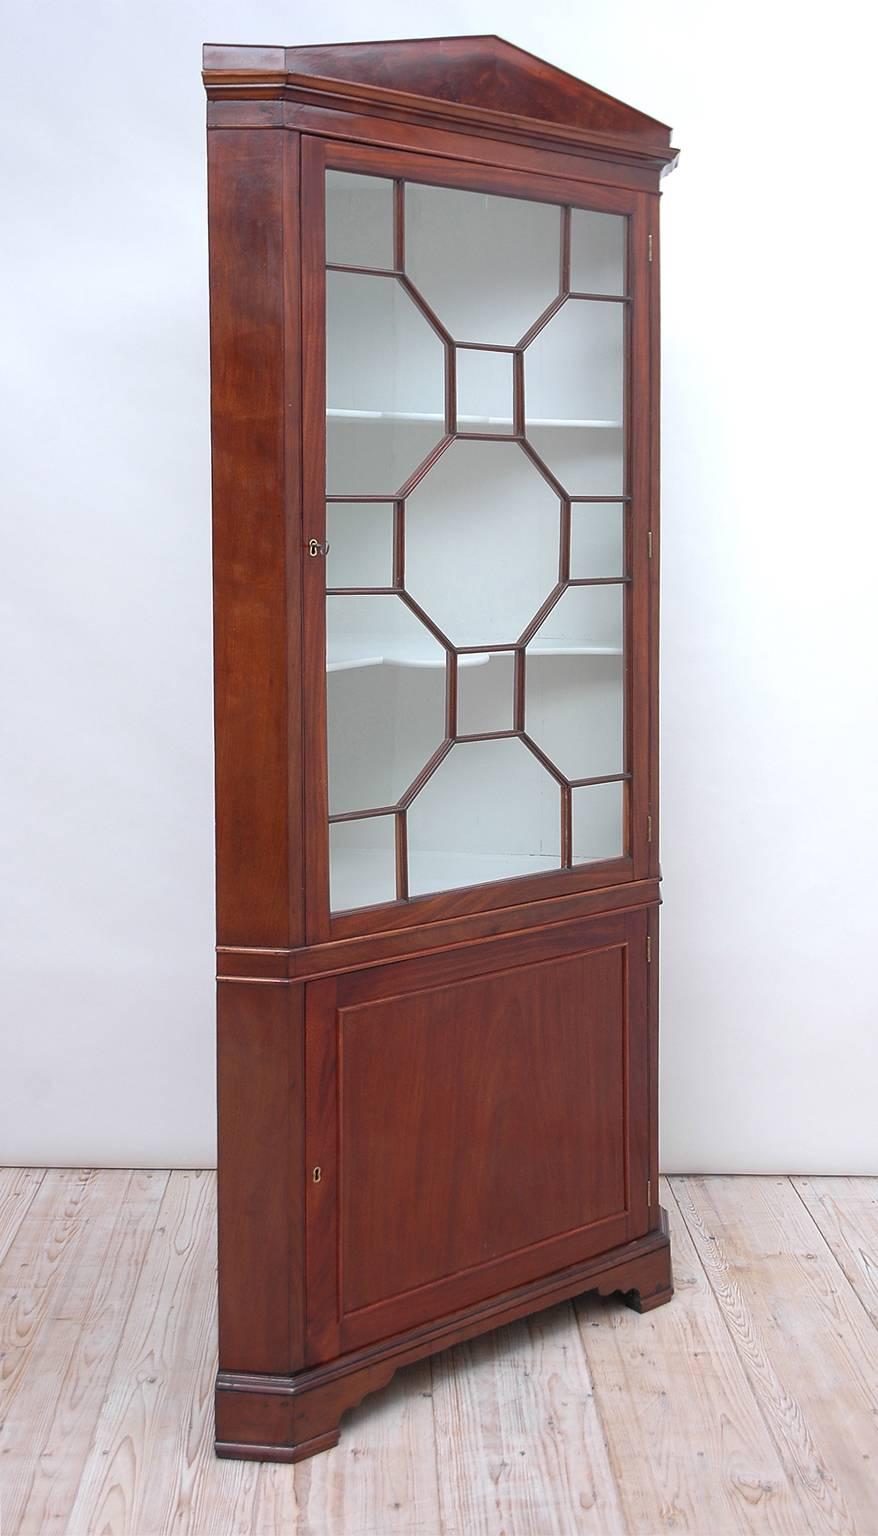 An English Regency corner cupboard in mahogany with pediment top, glazed and mullioned upper cabinet over paneled cabinet, and resting on bracket feet. England, circa 1820.
Measures: 33